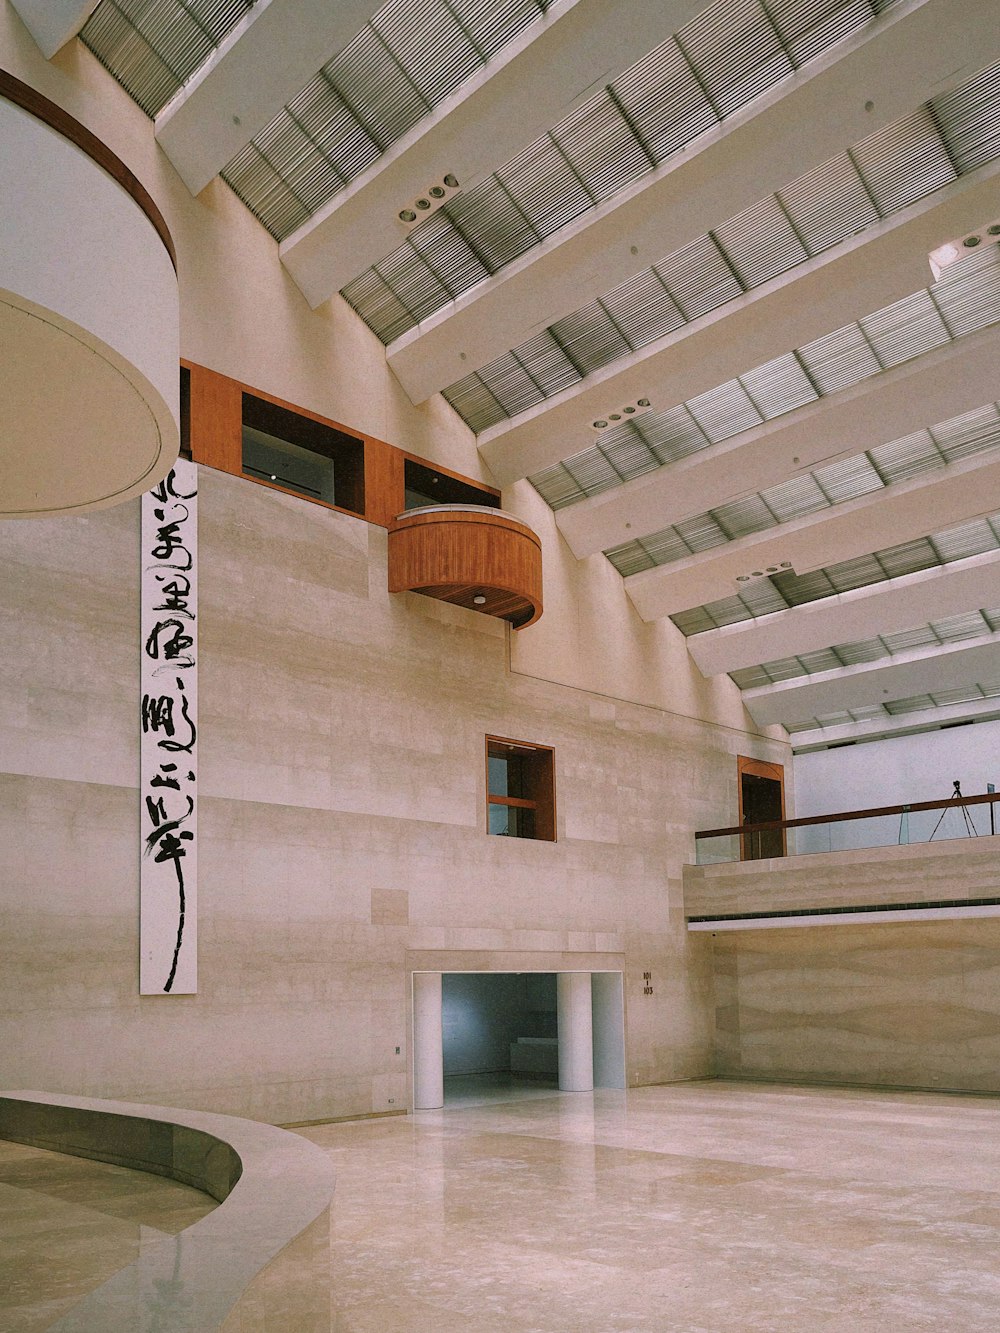 a large room with a staircase and a sign on the wall